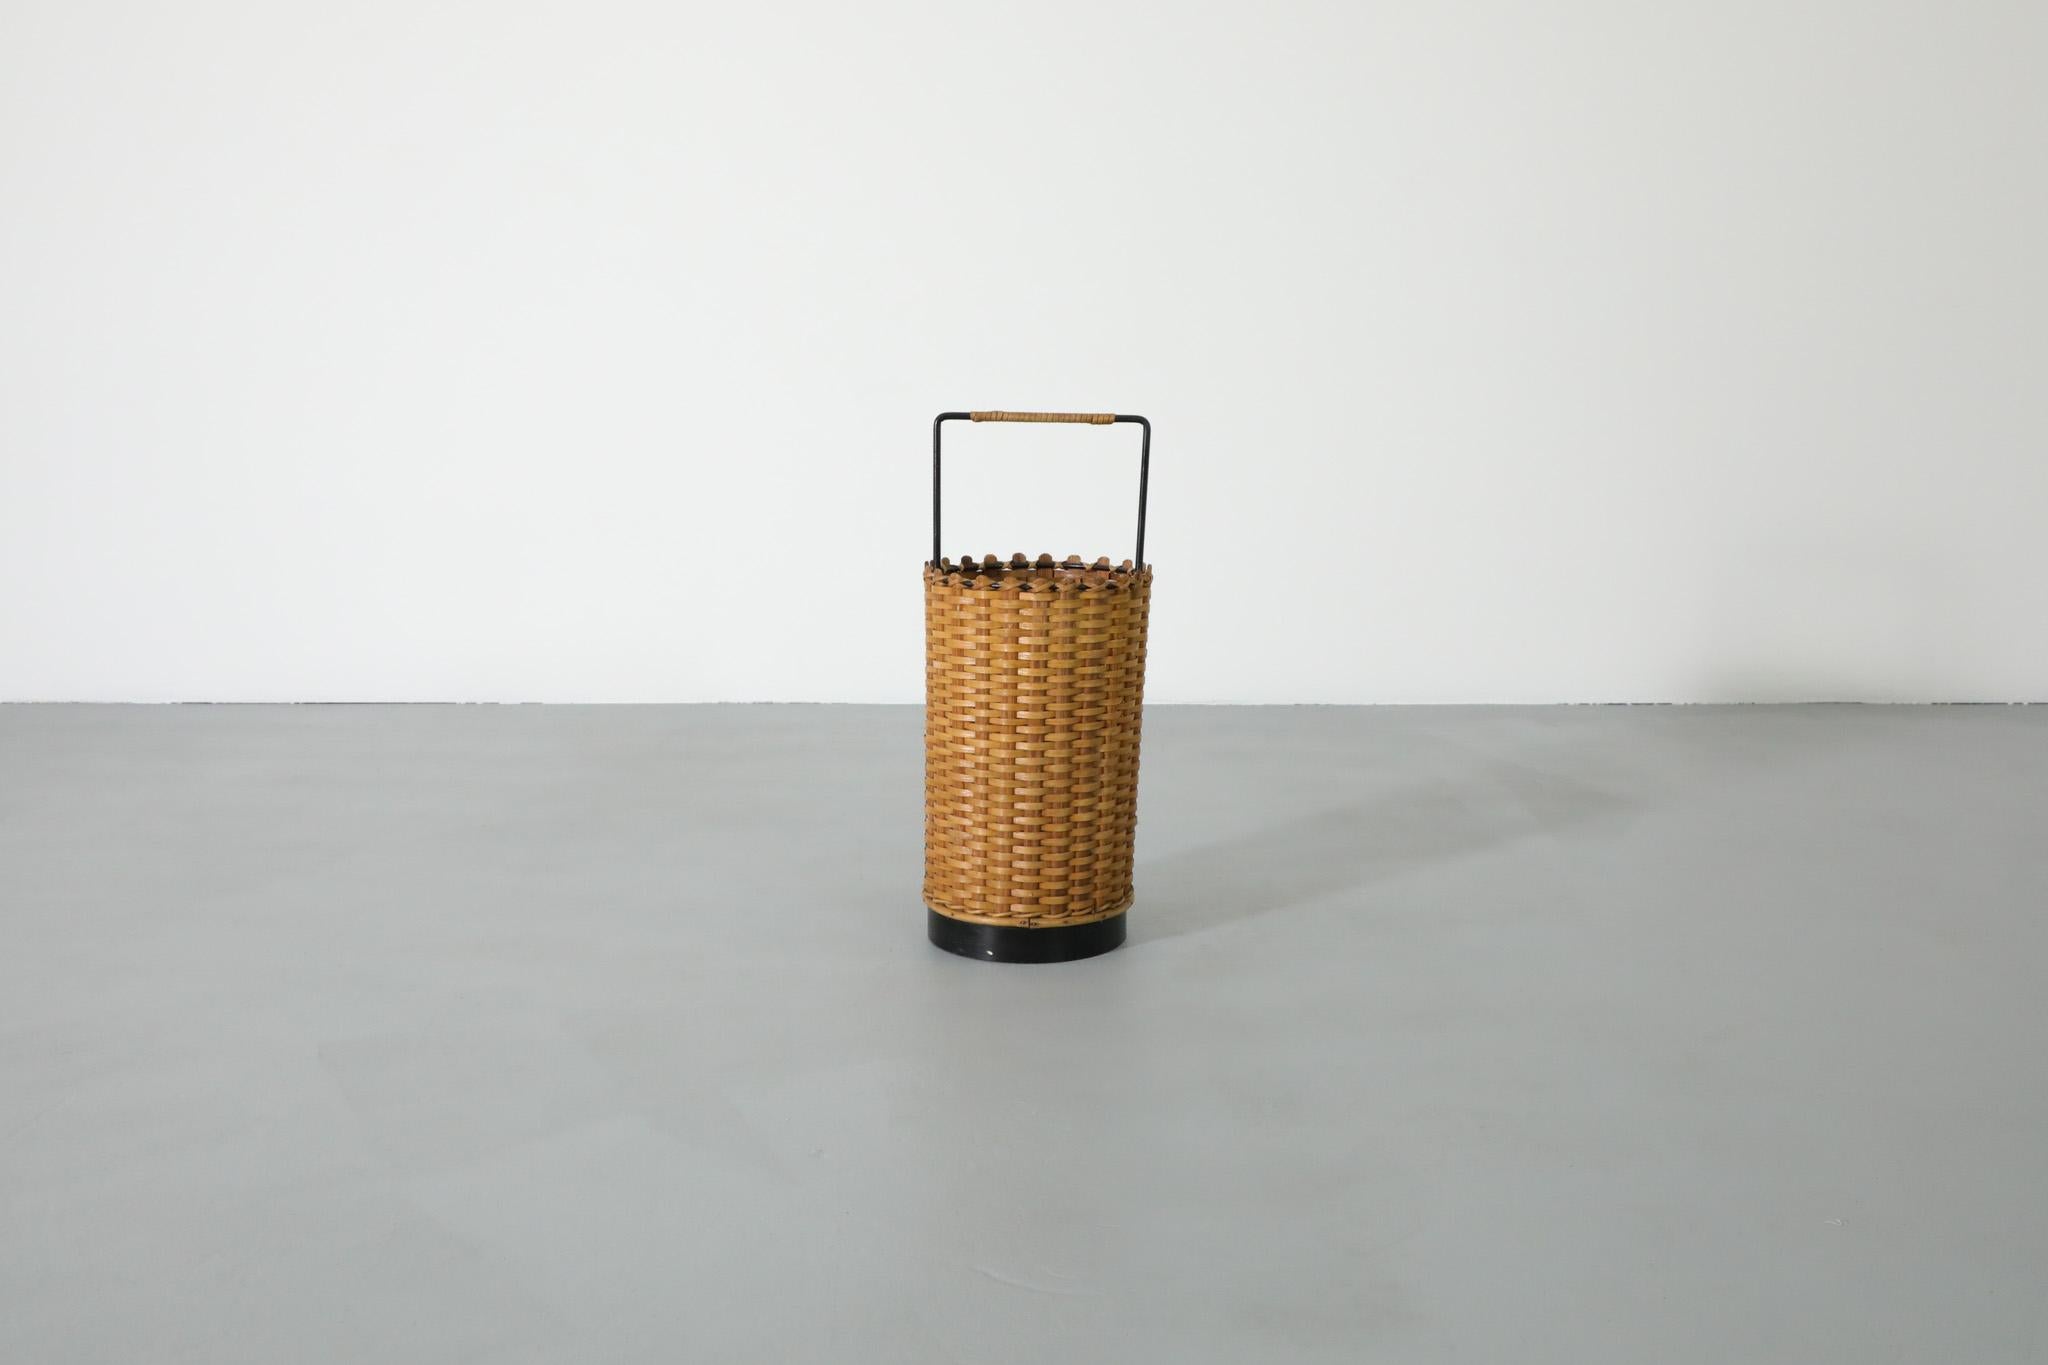 Beautifully woven small, French, Mid-Century rattan basket with black enameled base and rattan wrapped handle.  Perfect as an umbrella stand, waste basket, or small storage bin. In good original condition with some wear consistent with its age and